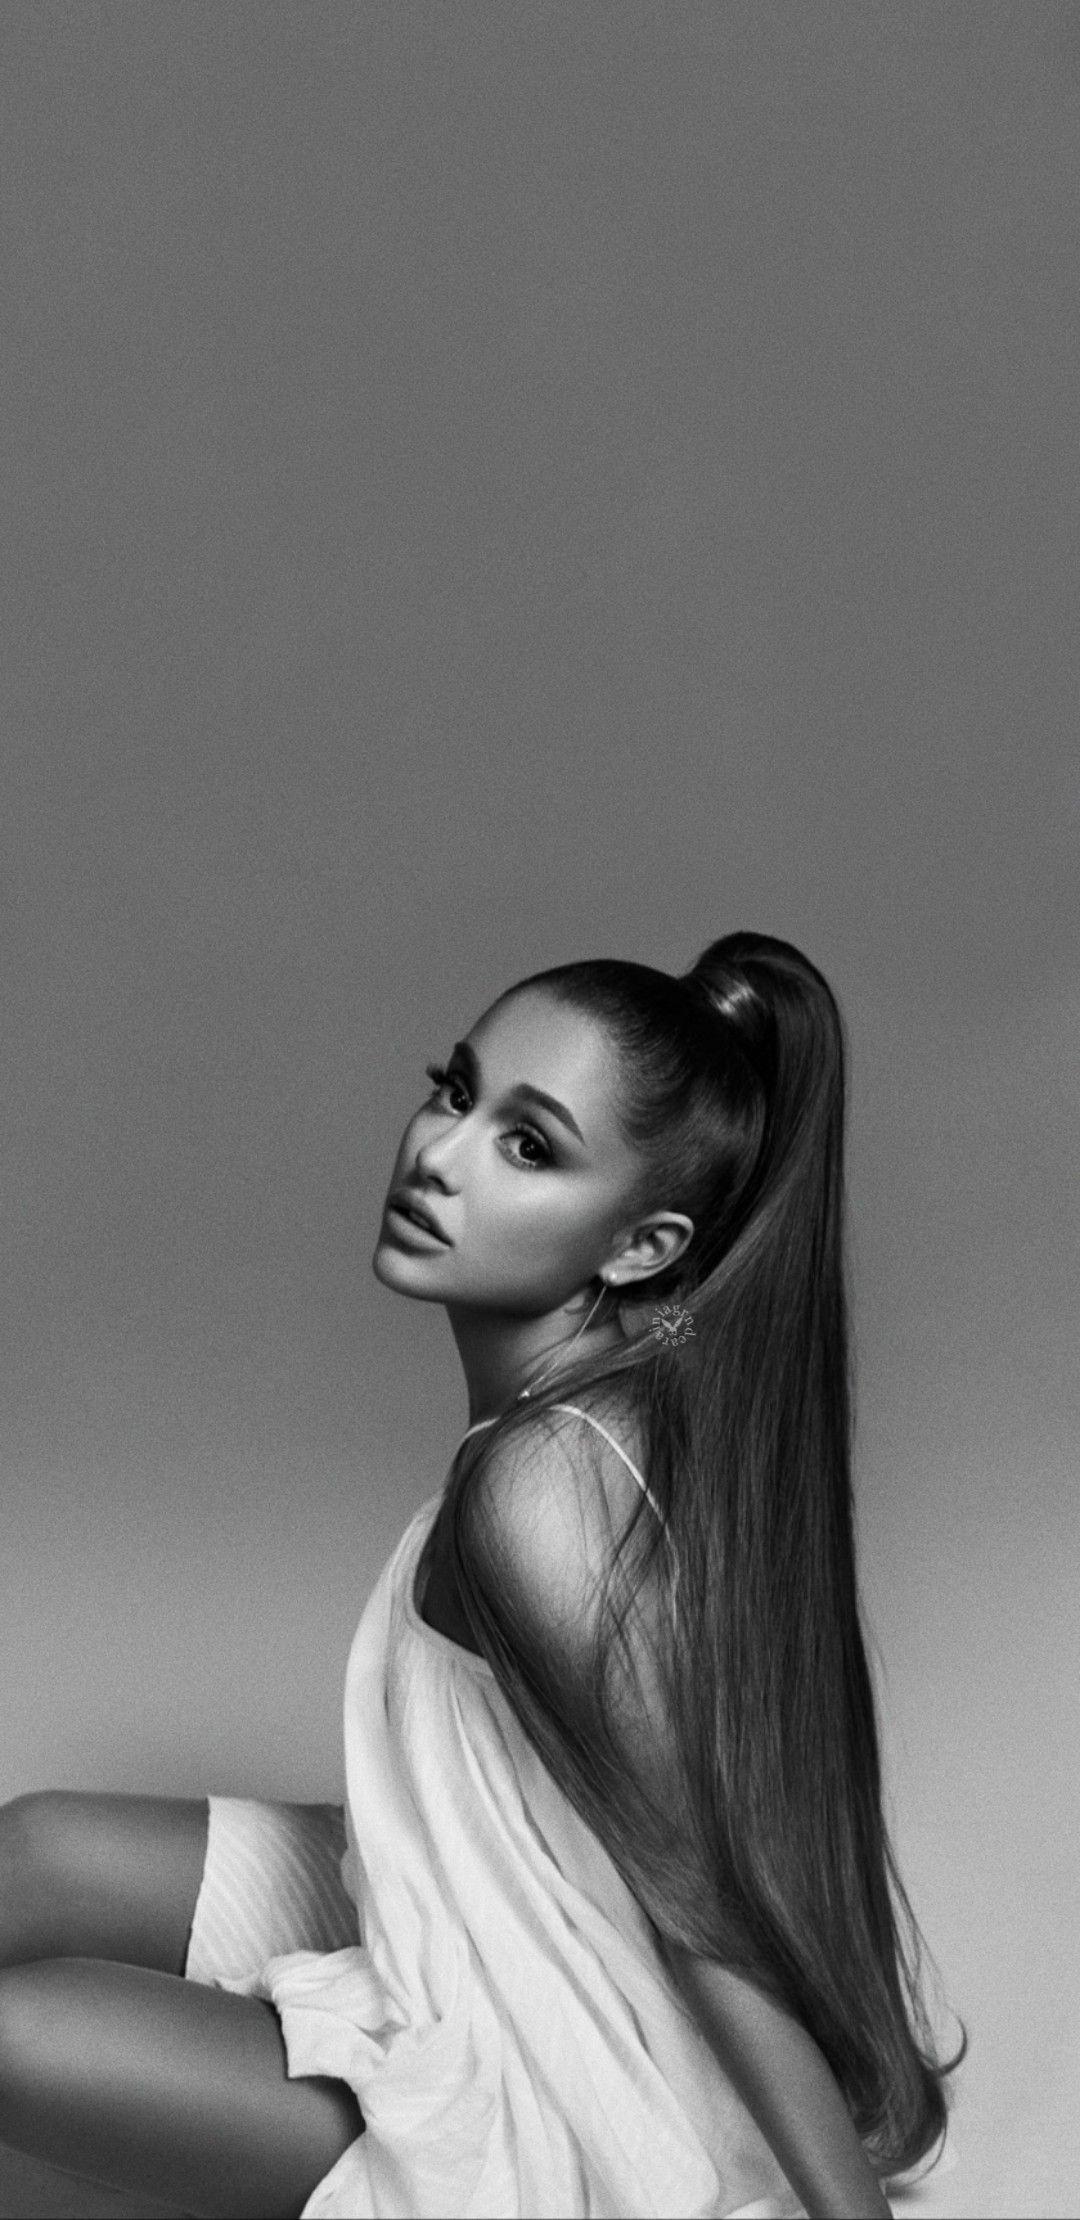  Ariana Grande Aesthetic Wallpapers Photos Pictures WhatsApp Status DP  Profile Picture HD Free Download